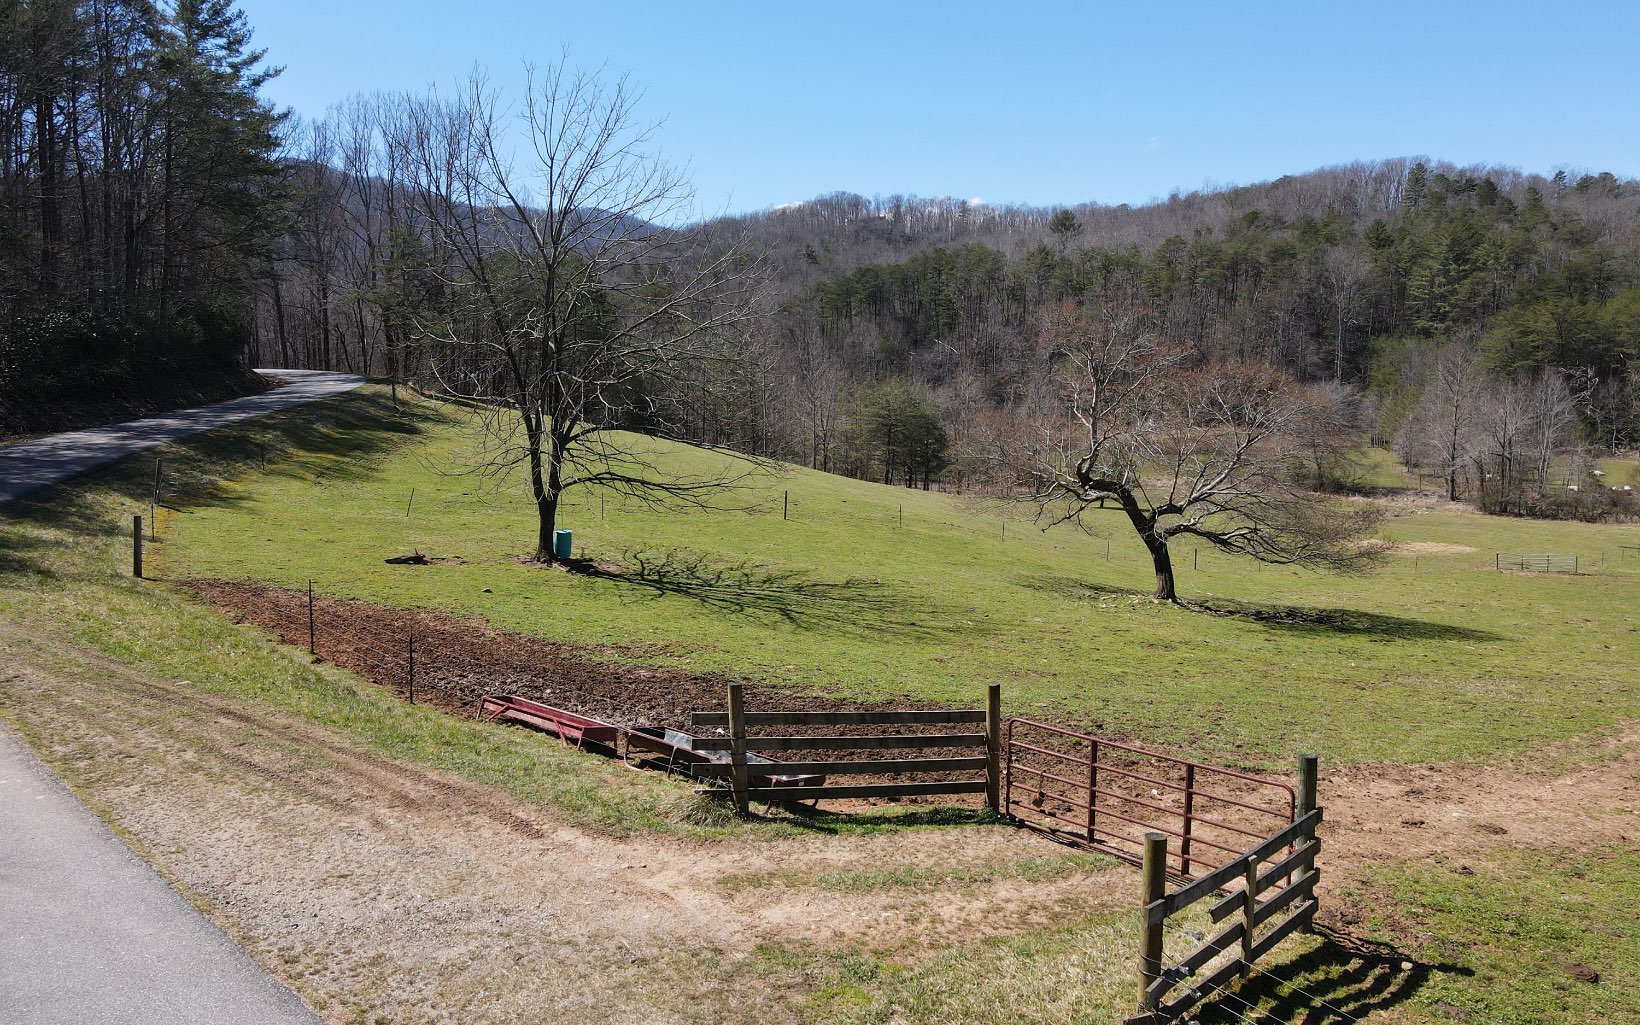 Possibilities are endless with this UNRESTRICTED 53.7 acre tract. An incredible INVESTMENT opportunity. Property is on both sides of the road. Apprx. 15 acres of pasture with creek frontage along one side and approx. 38 acres of wooded property with gentle terrain on the other. Bring your family and farm animals and enjoy your own oasis in the MOUNTAINS OF NORTH GEORGIA.